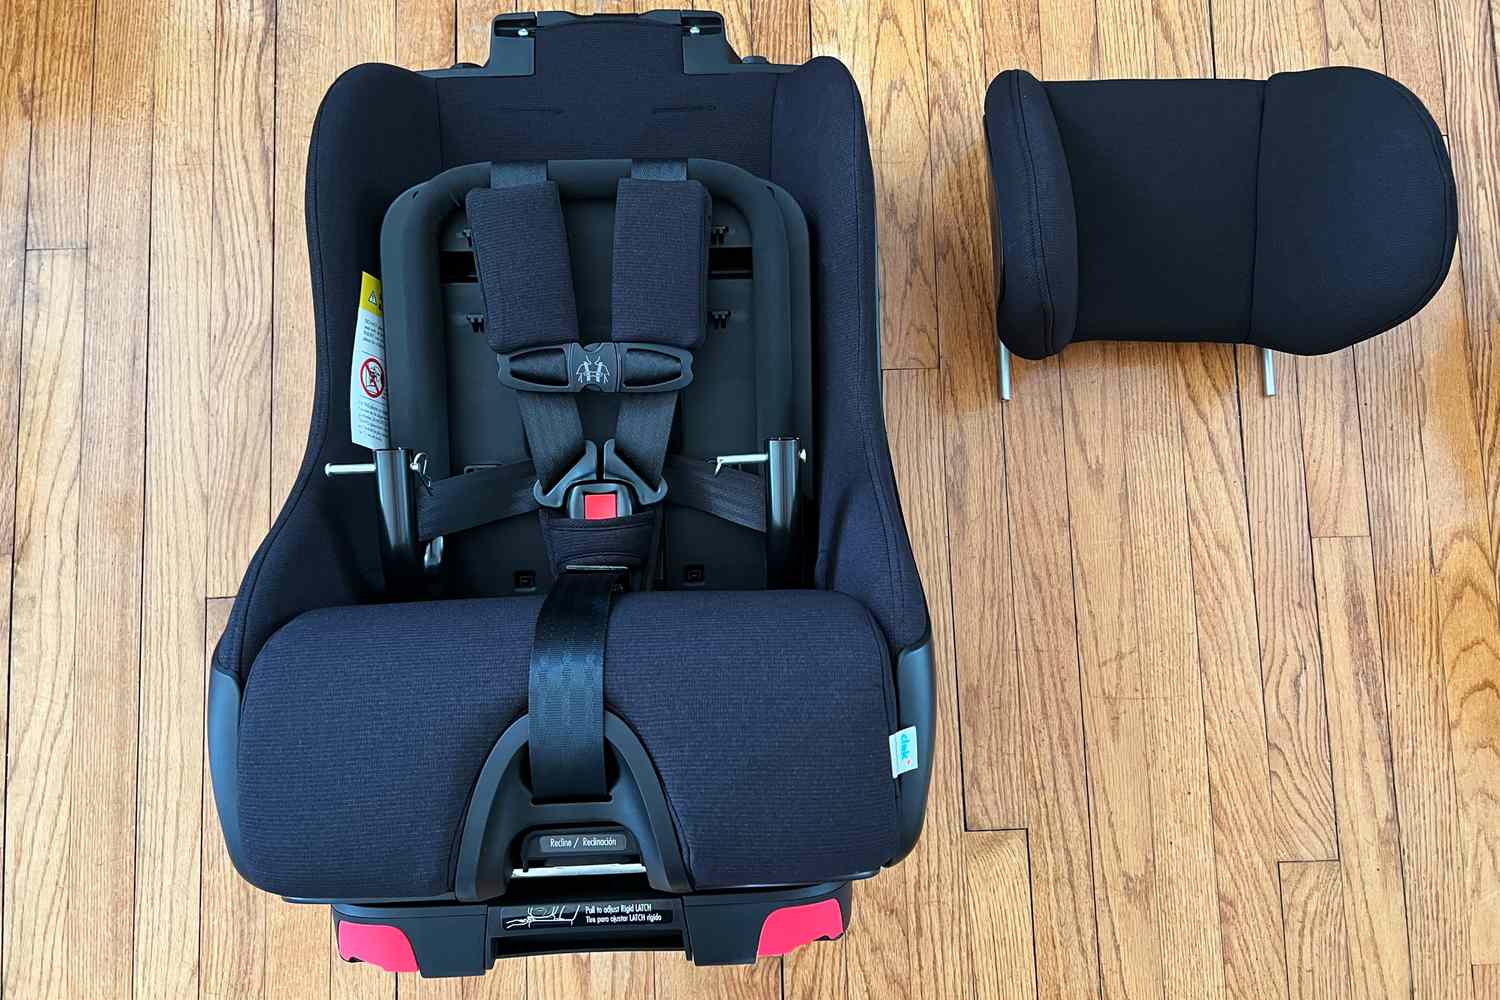 The Clek Foonf car seat out of its packaging